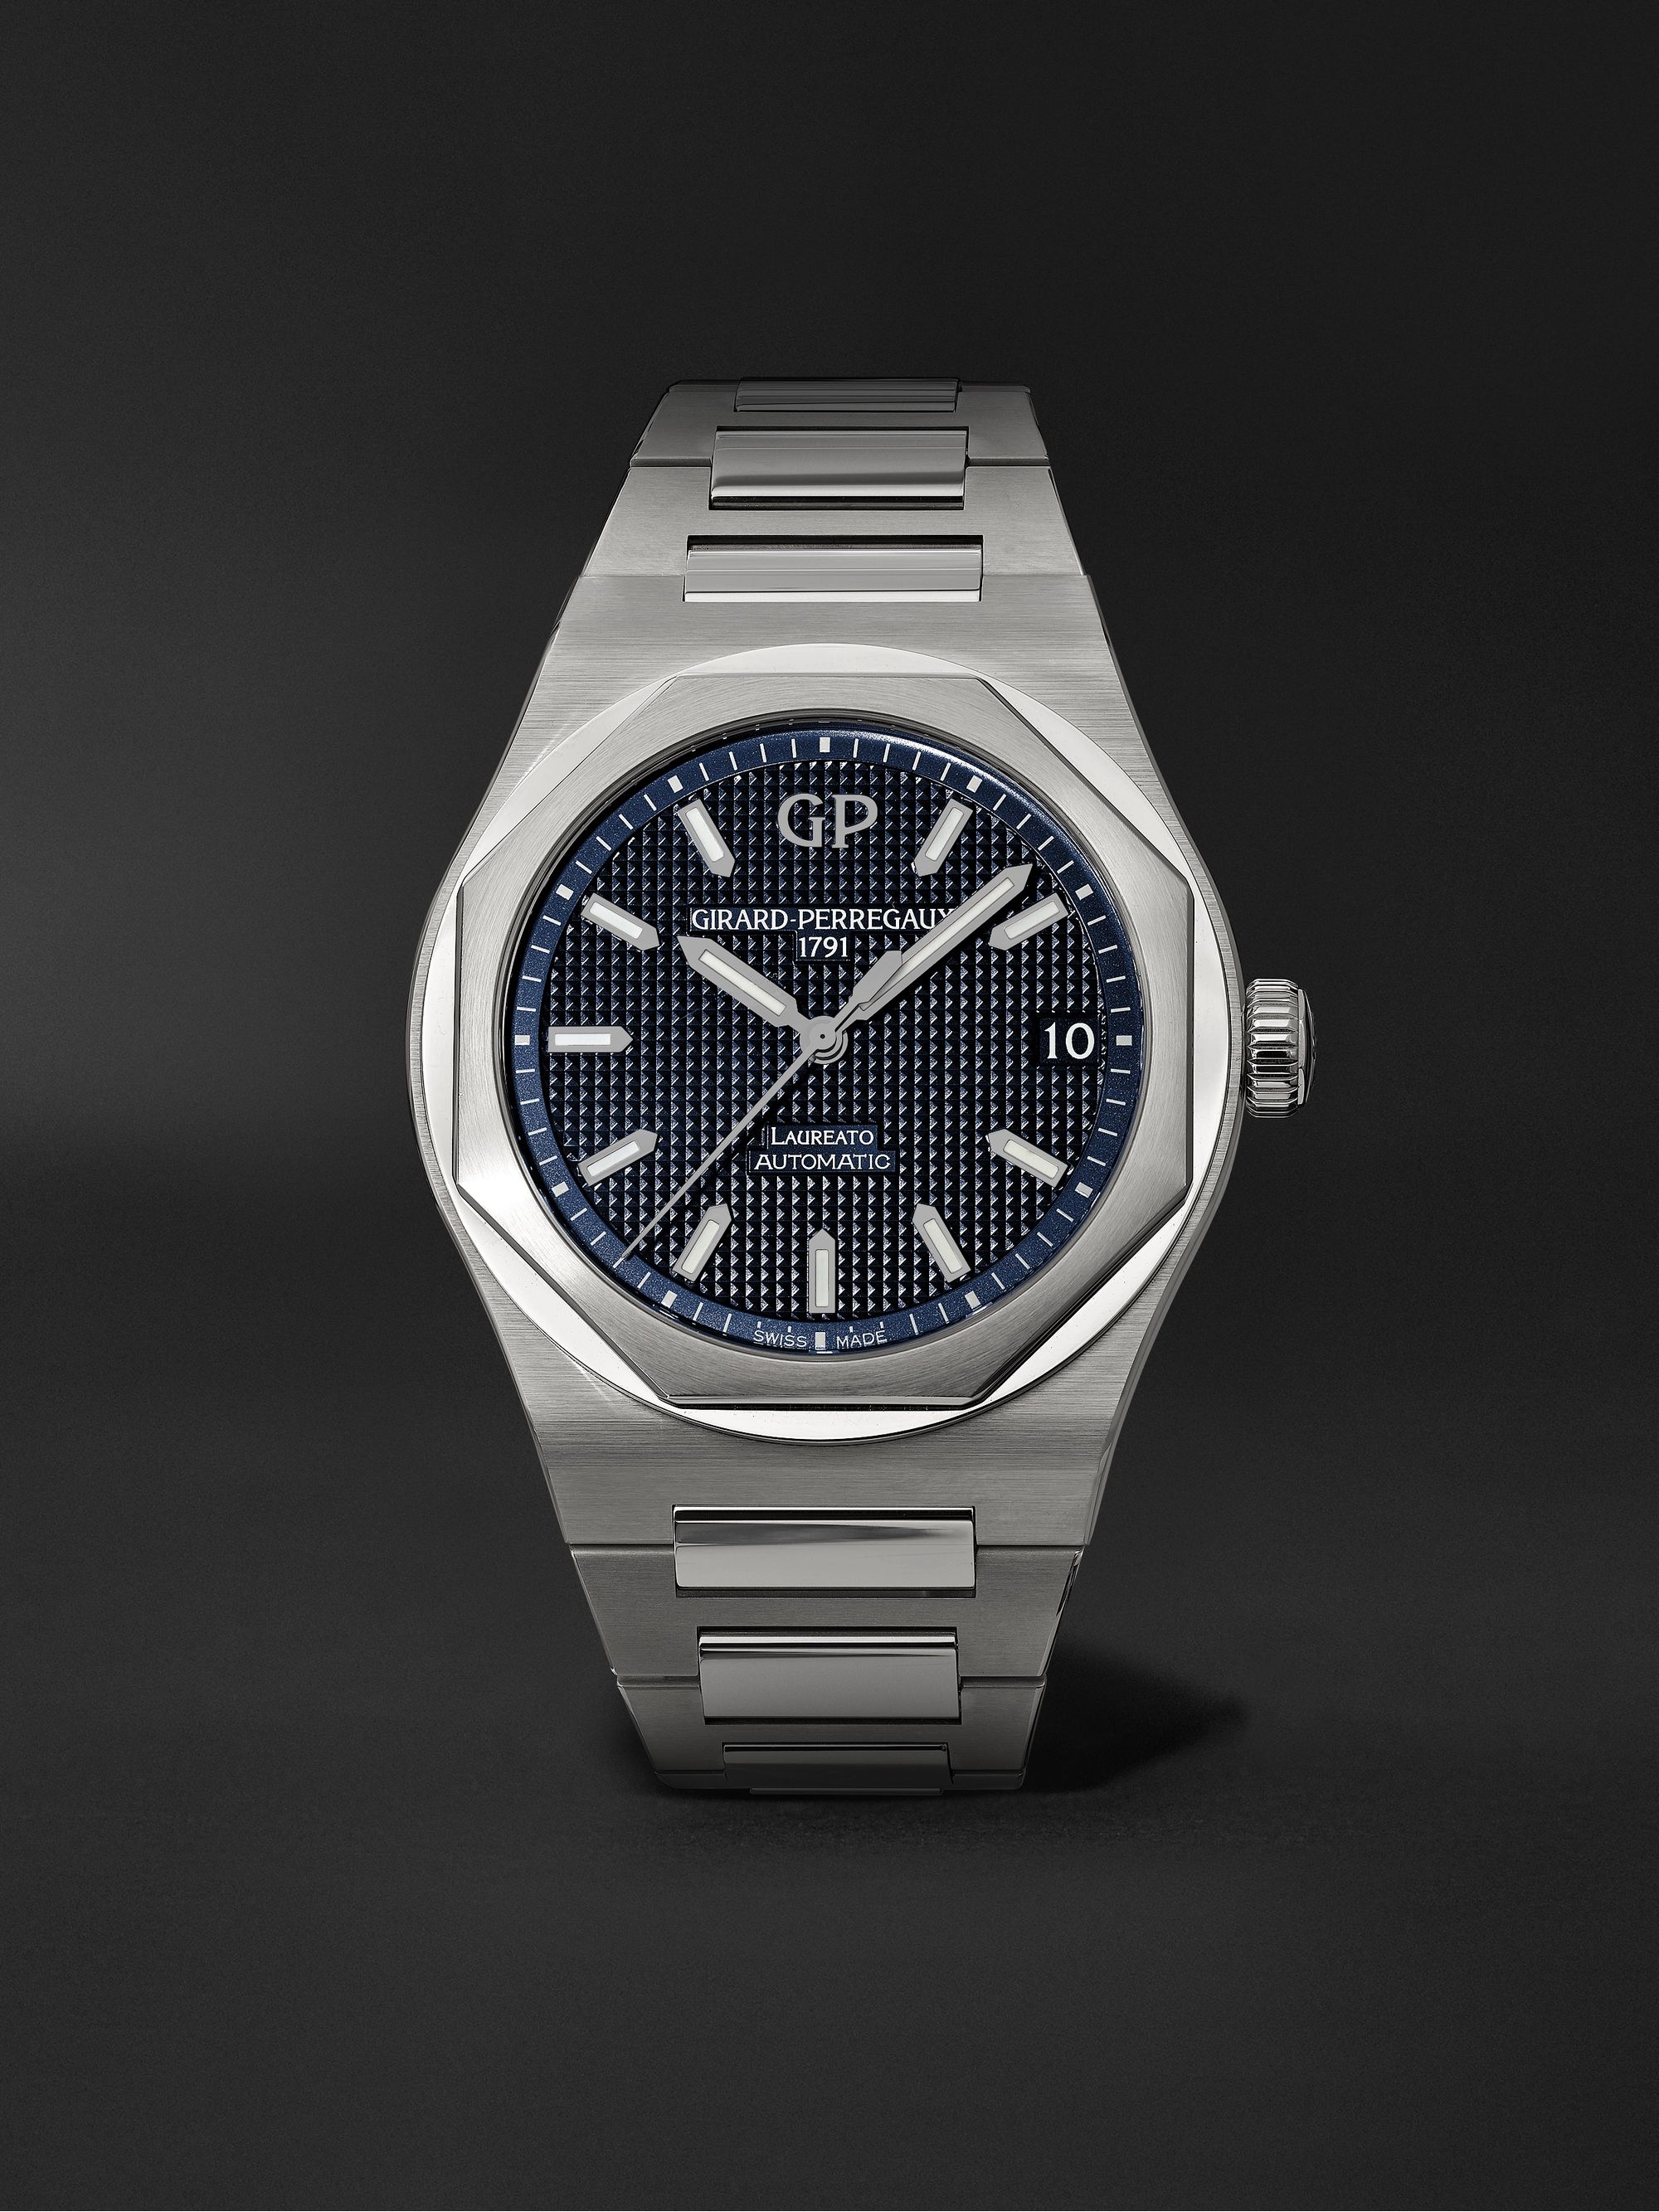 GIRARD-PERREGAUX Laureato Automatic 42mm Stainless Steel Watch, Ref. No. 81010-11-431-11A